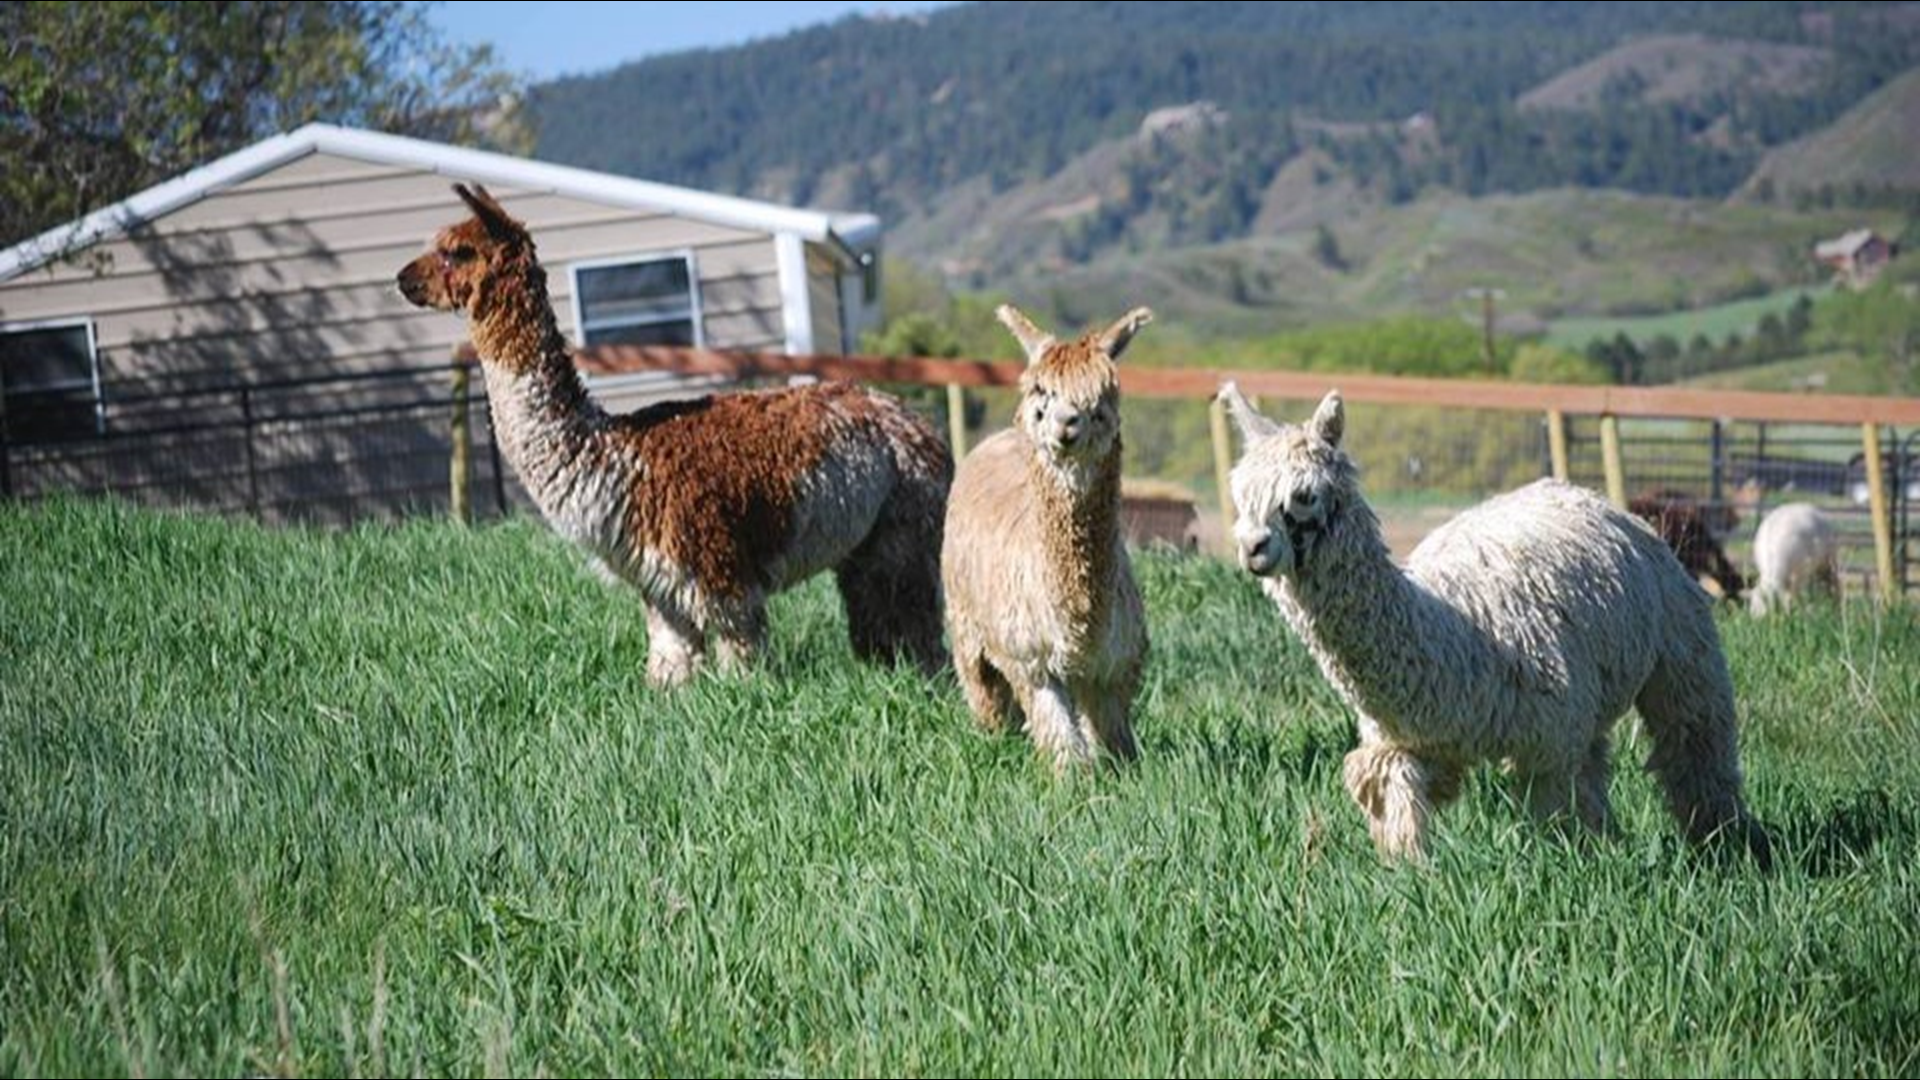 The 2019 Great Western Alpaca Show at the National Western Stock Show Complex runs from Friday, May 3 to Sunday, May 5 in Denver, Colo.